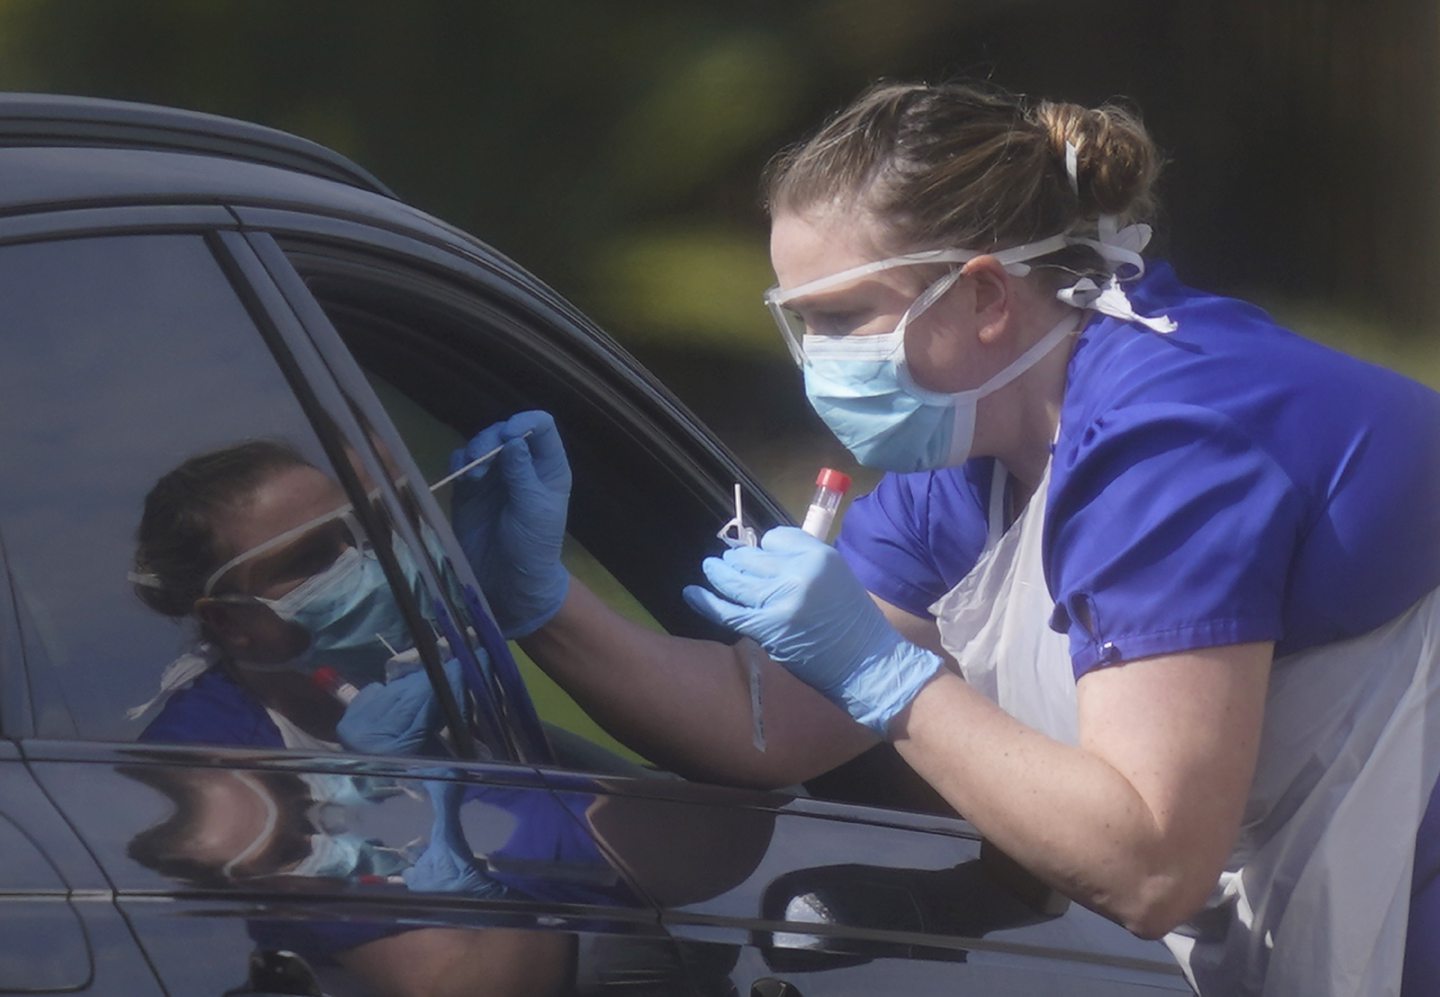 An NHS worker being tested for coronavirus at a temporary testing station in the car park of Chessington World of Adventures in Chessington, Greater London.